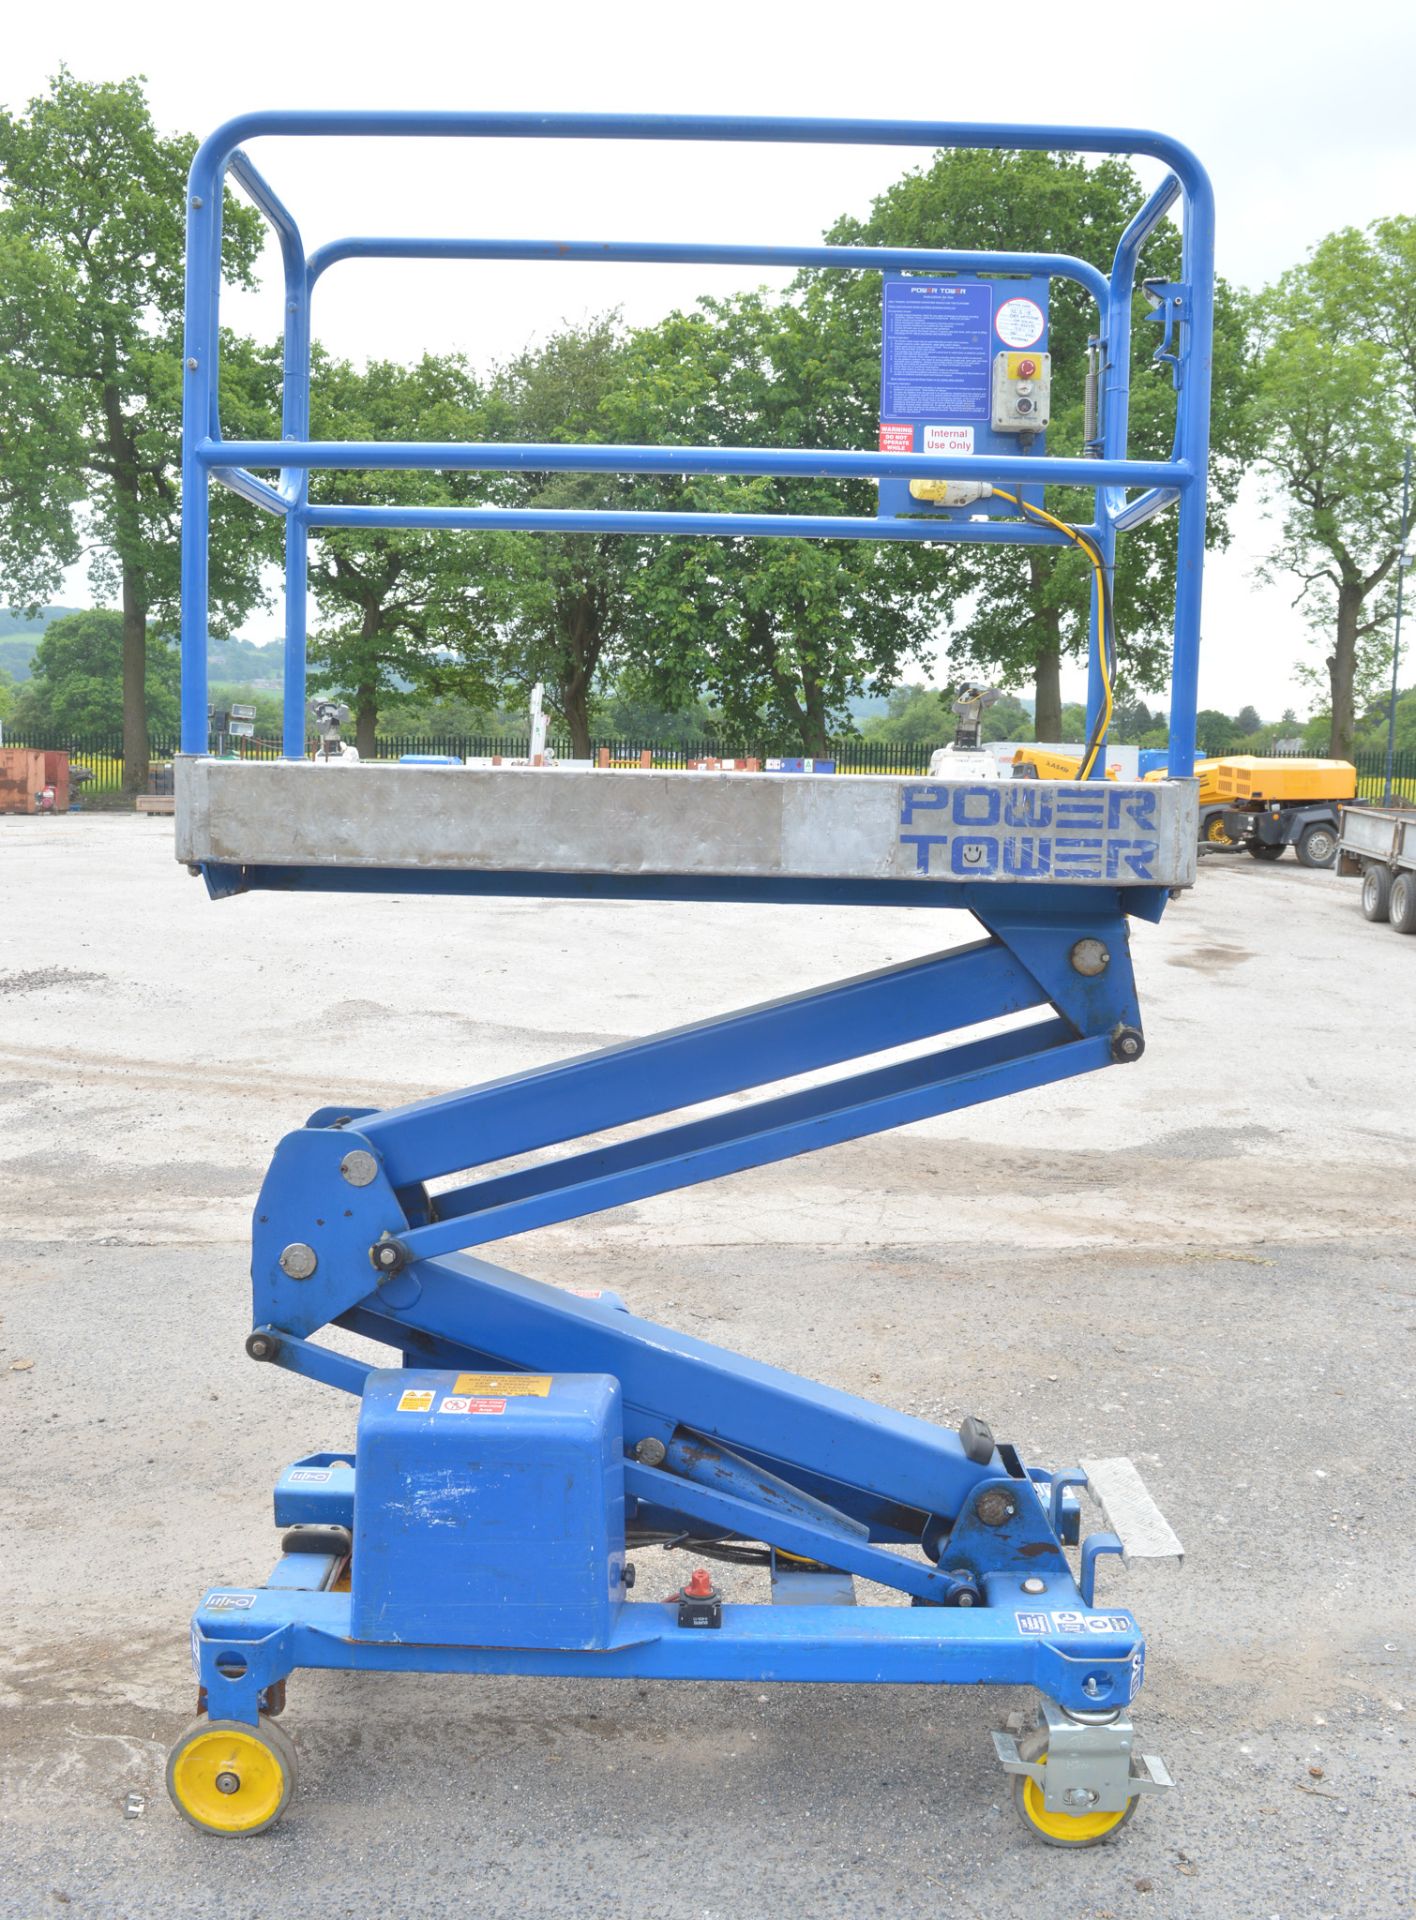 Power Tower PTE51 battery electric scissor lift access platform  Year: 2008 c/w loler certificate - Image 5 of 5